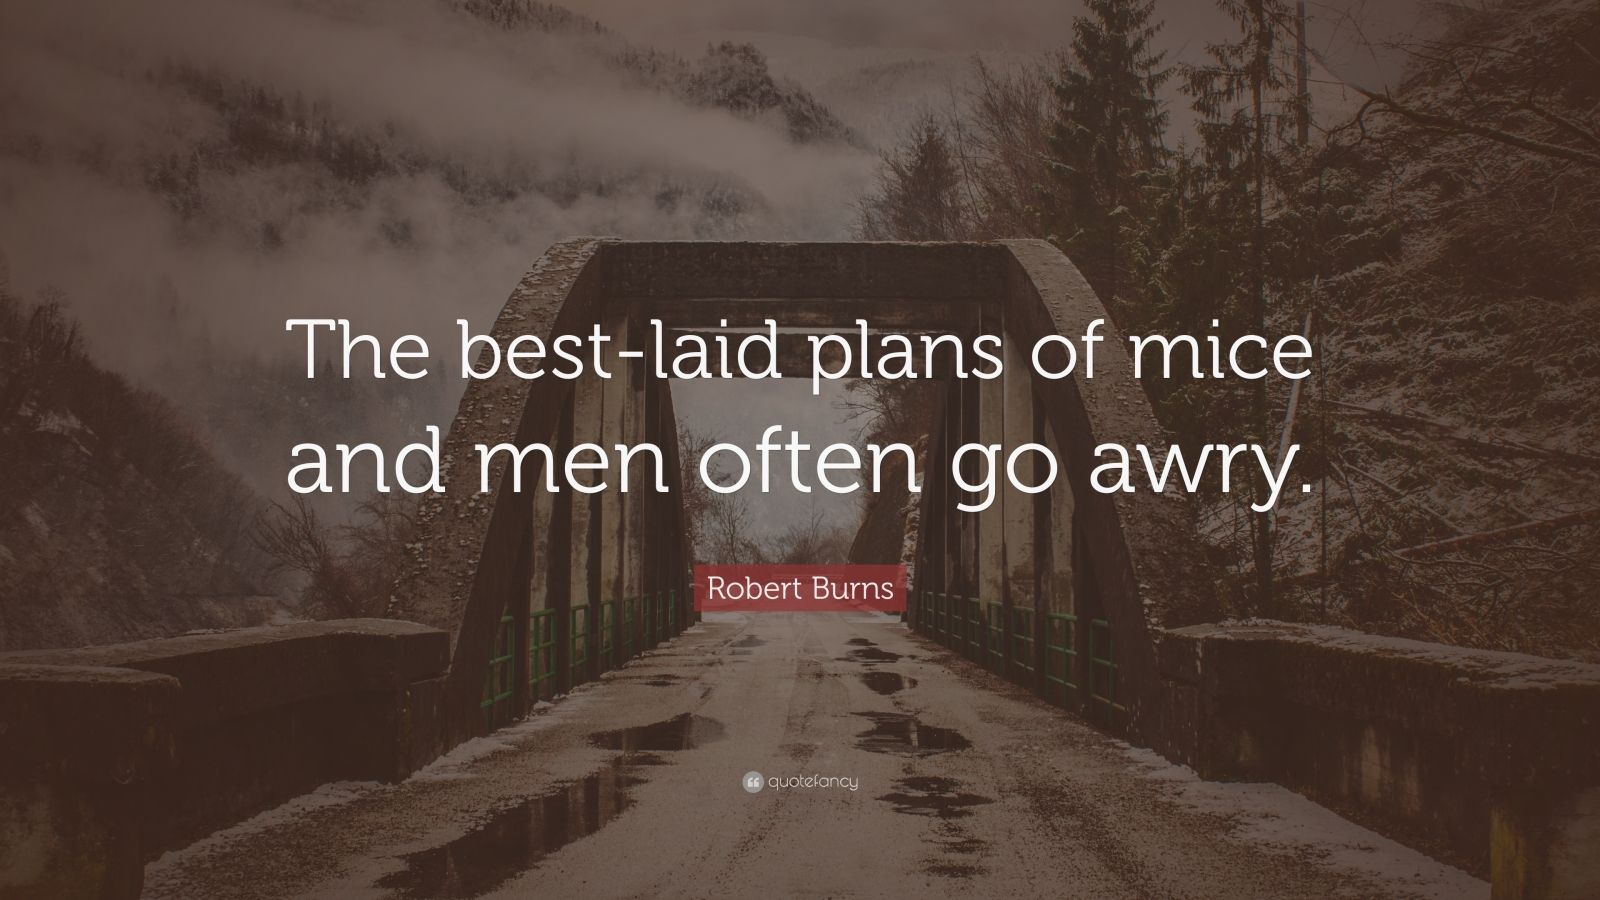 Robert Burns Quote The best laid plans of mice and men often go awry 